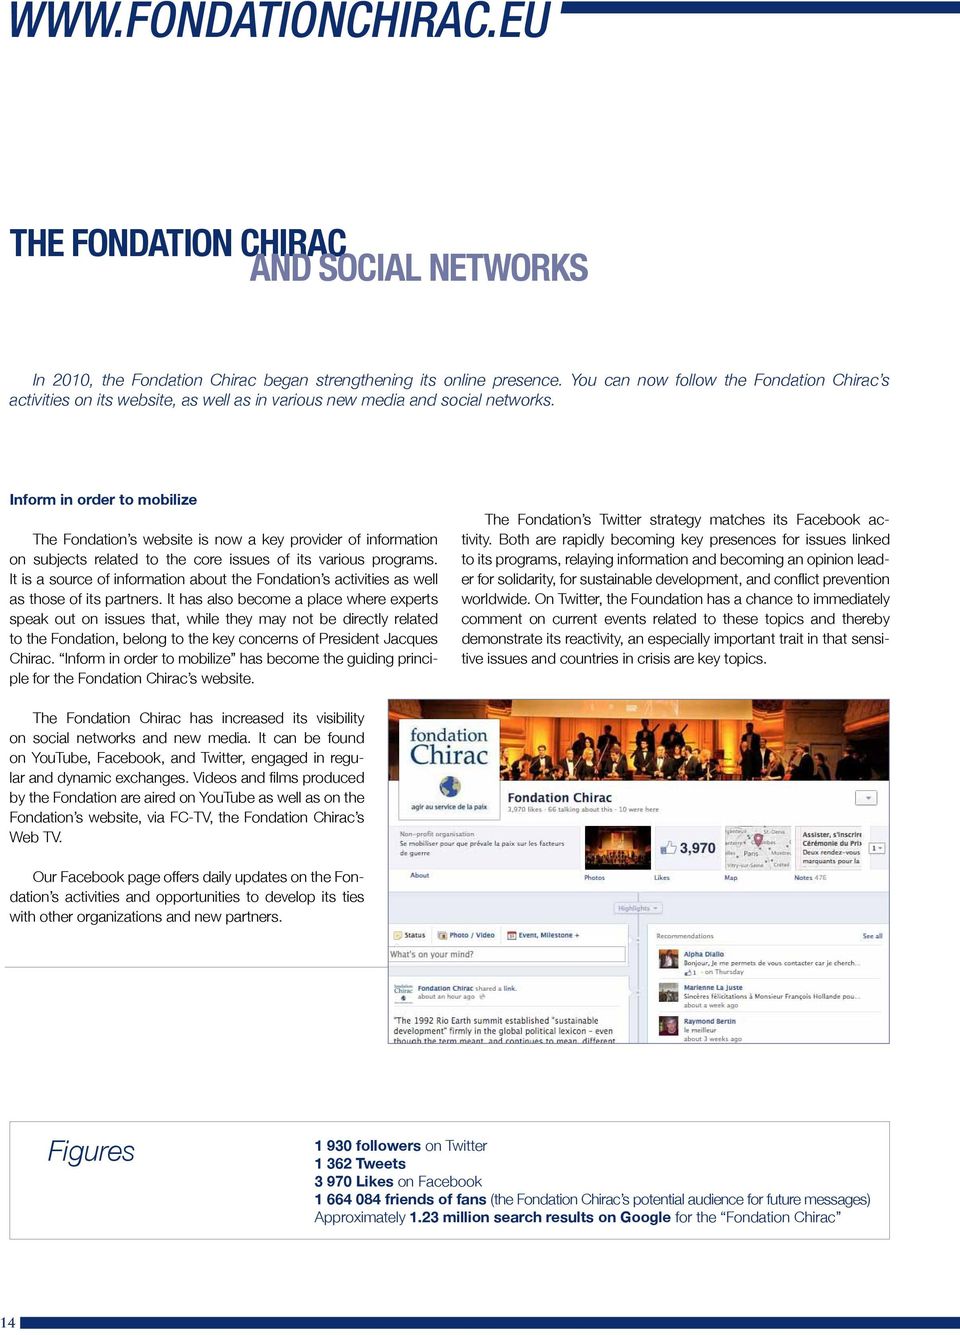 Inform in order to mobilize The Fondation s website is now a key provider of information on subjects related to the core issues of its various programs.